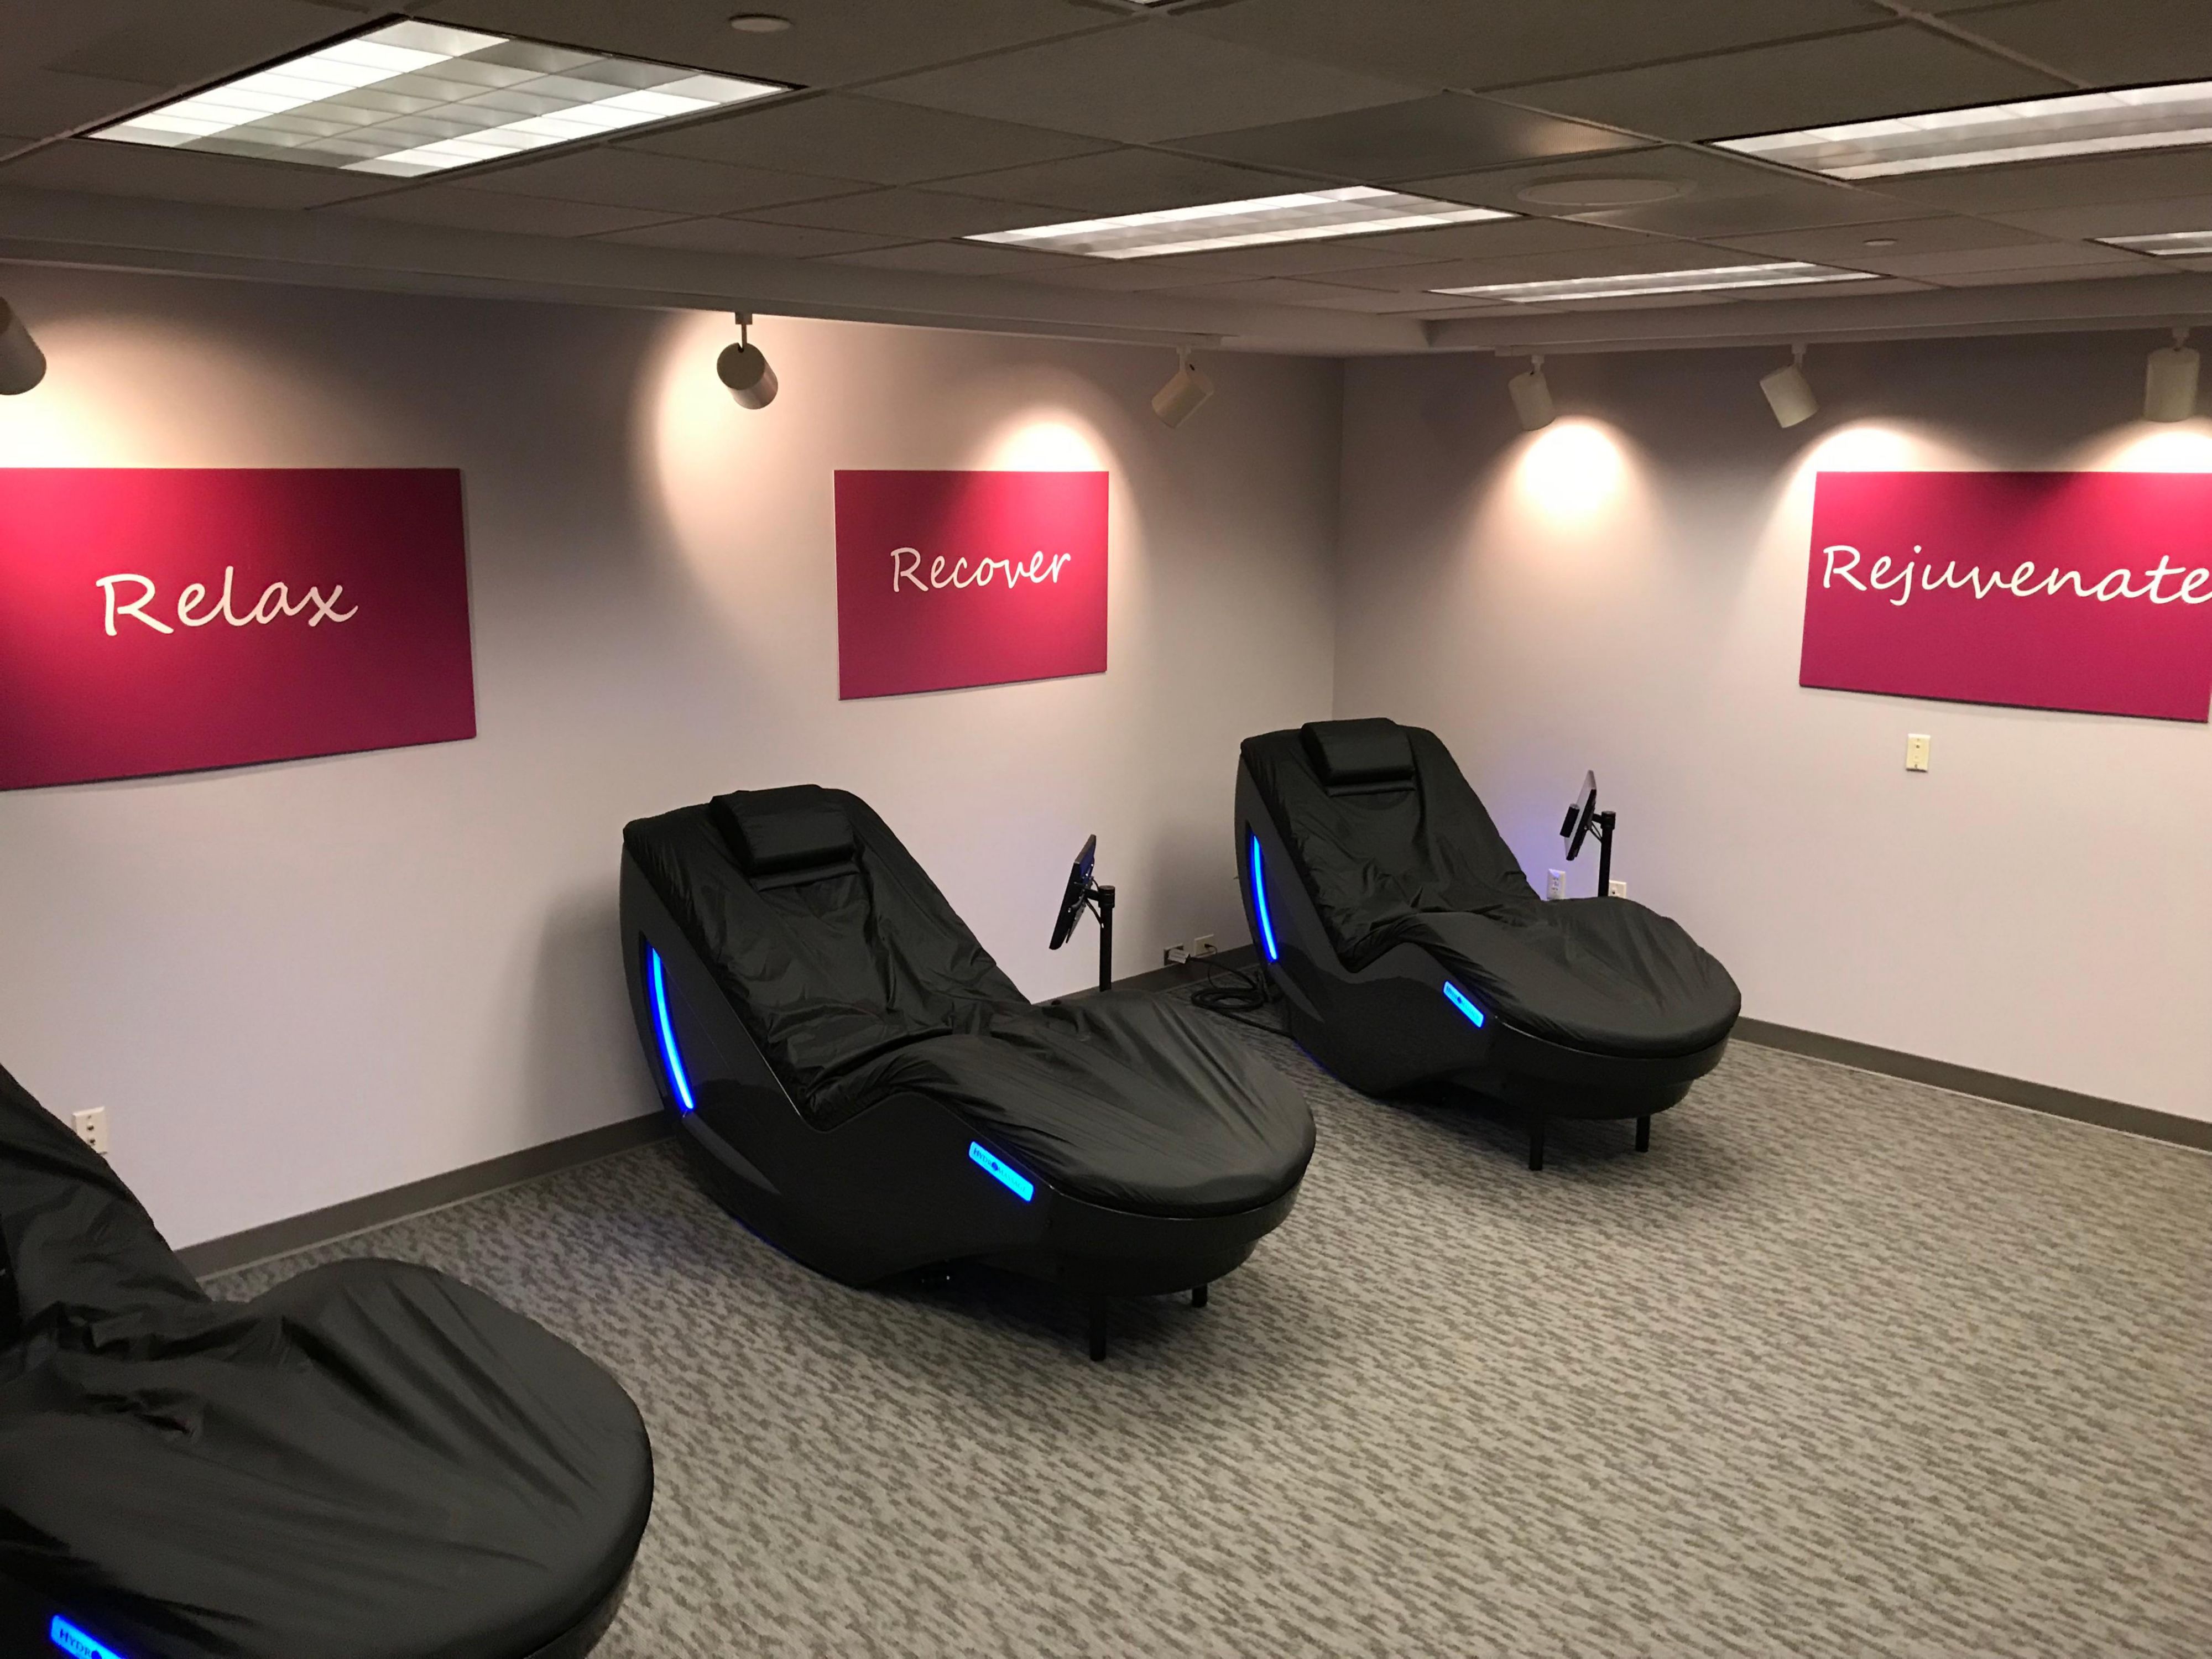 Relax, Recover, and Rejuvenate in our first floor lounge.  HydroMassage is a true innovation in relaxation.  The HydroMassage touchscreens allows for personalized and real=time adjustment of all massages while offering a multimedia content library to enhance the massage experience.  